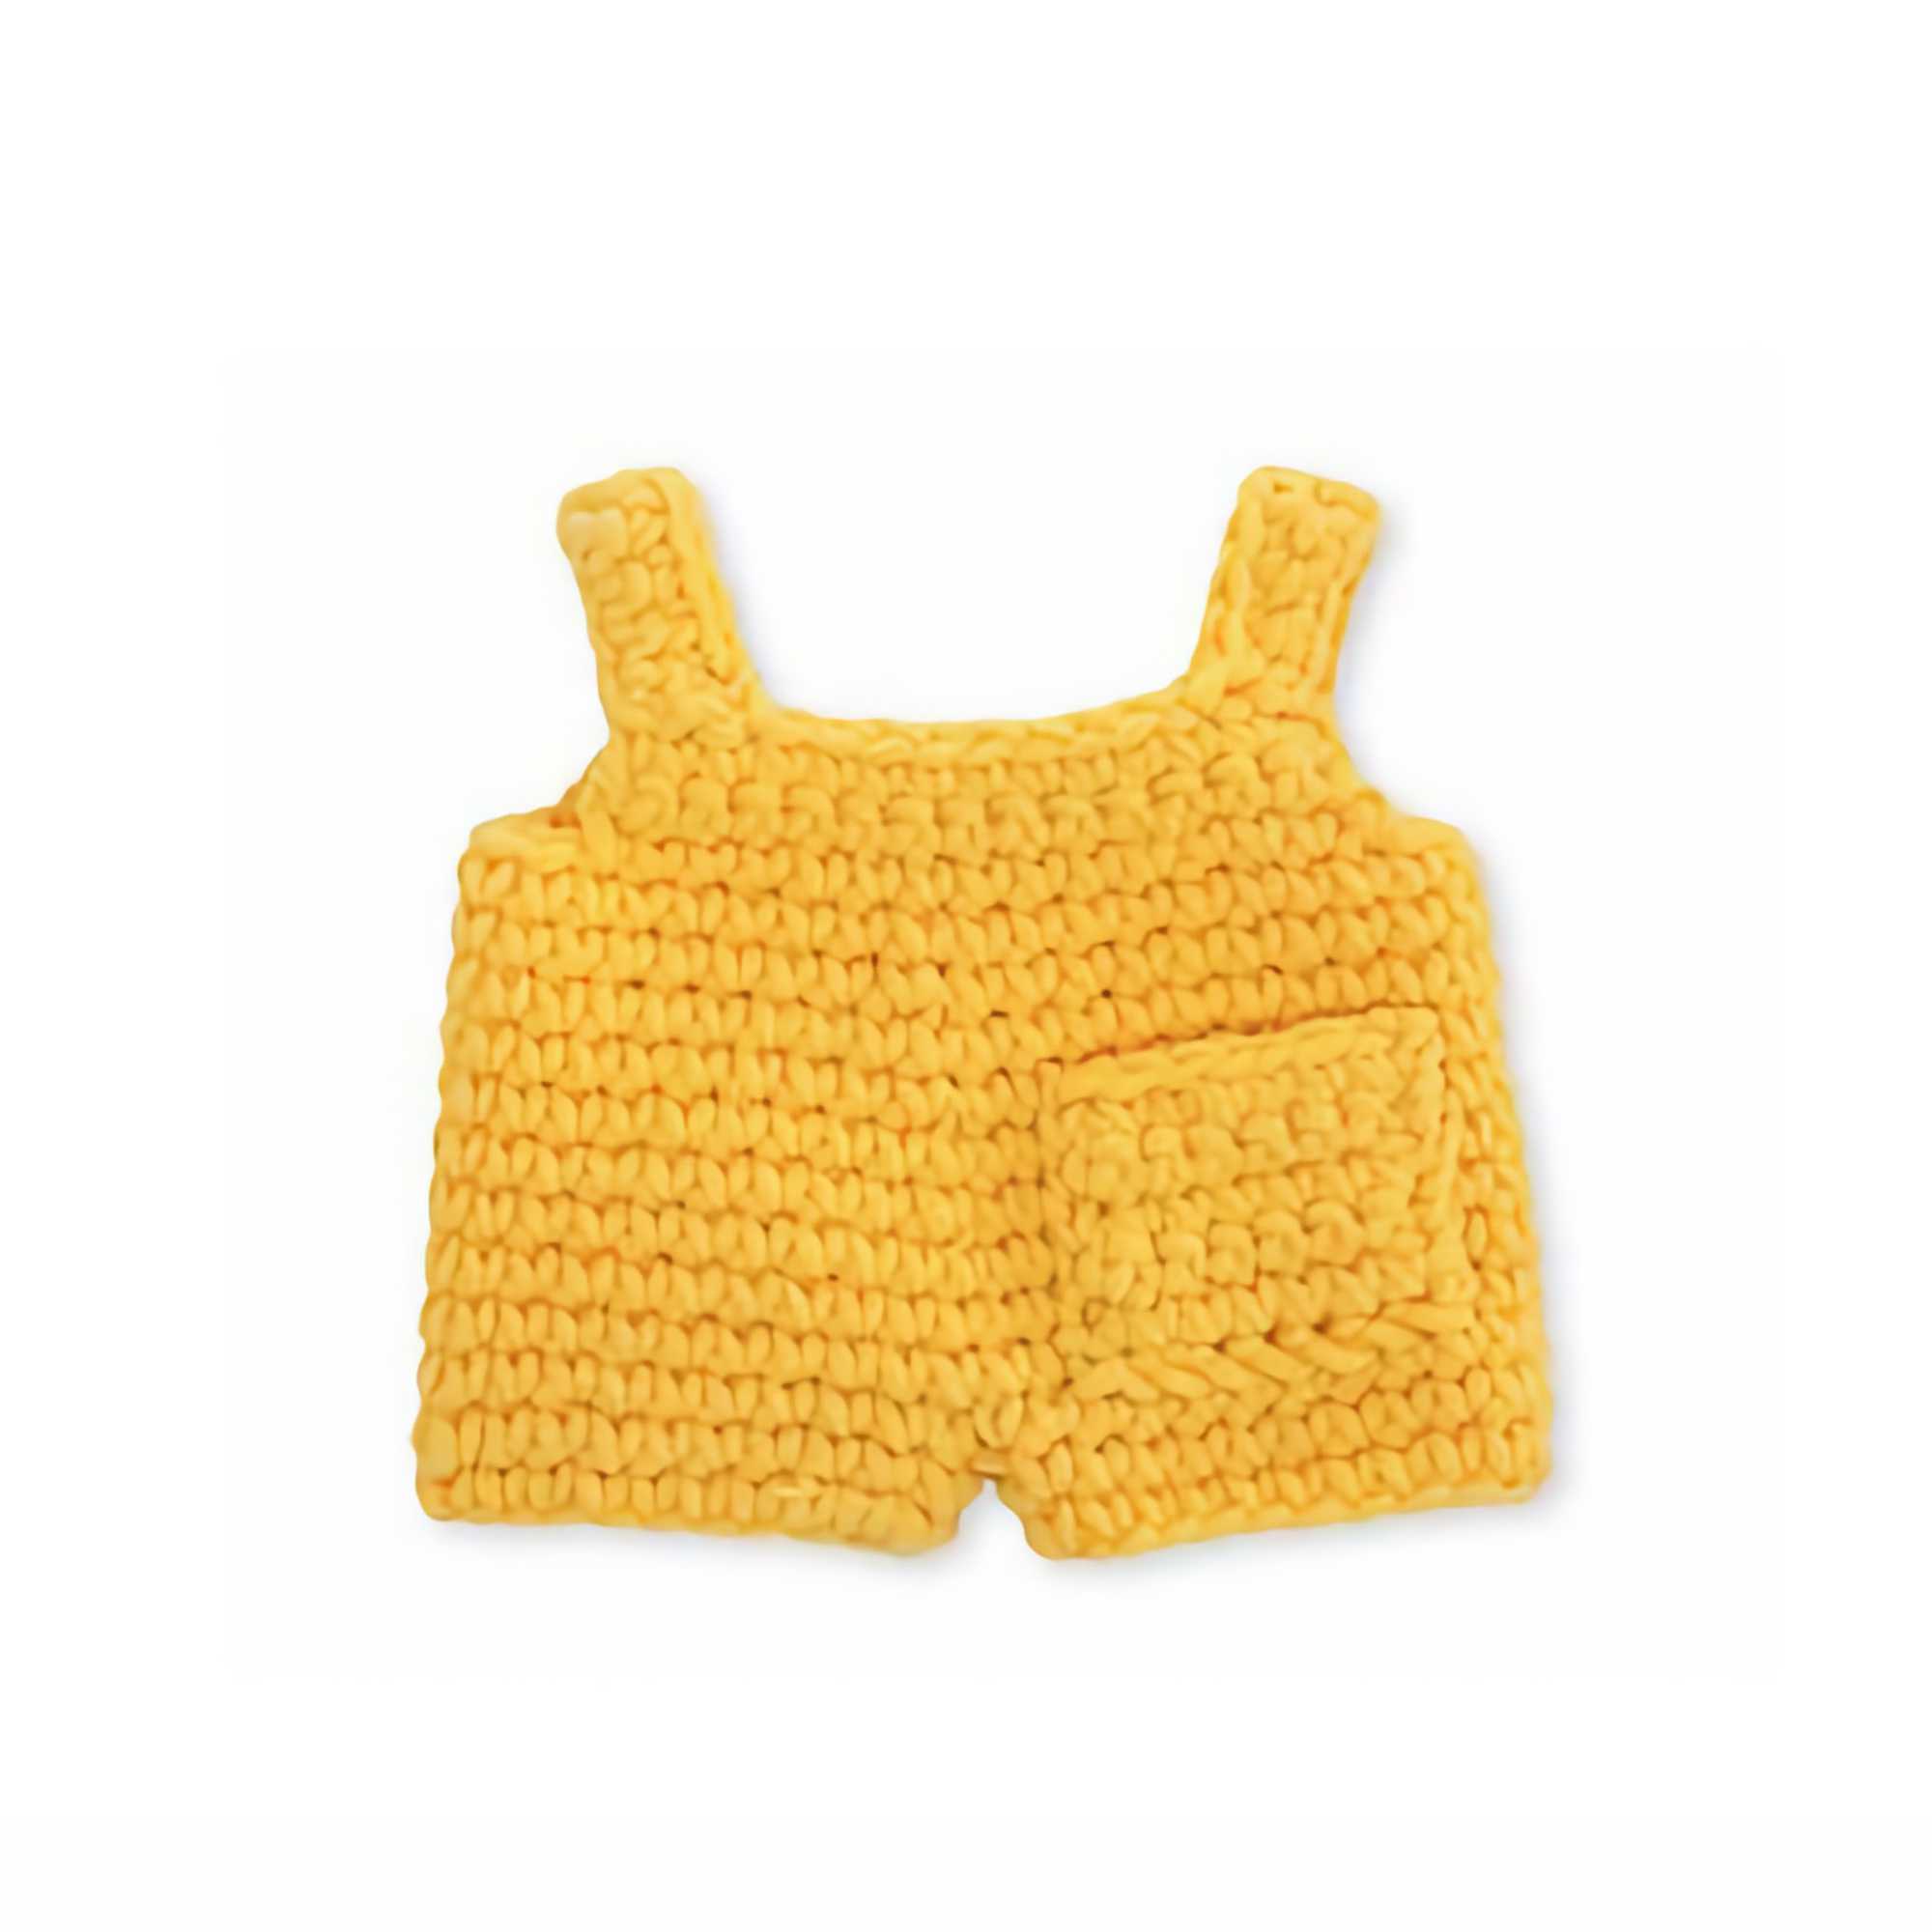 Just Dutch handmade crocheted outfit, Yellow Overall